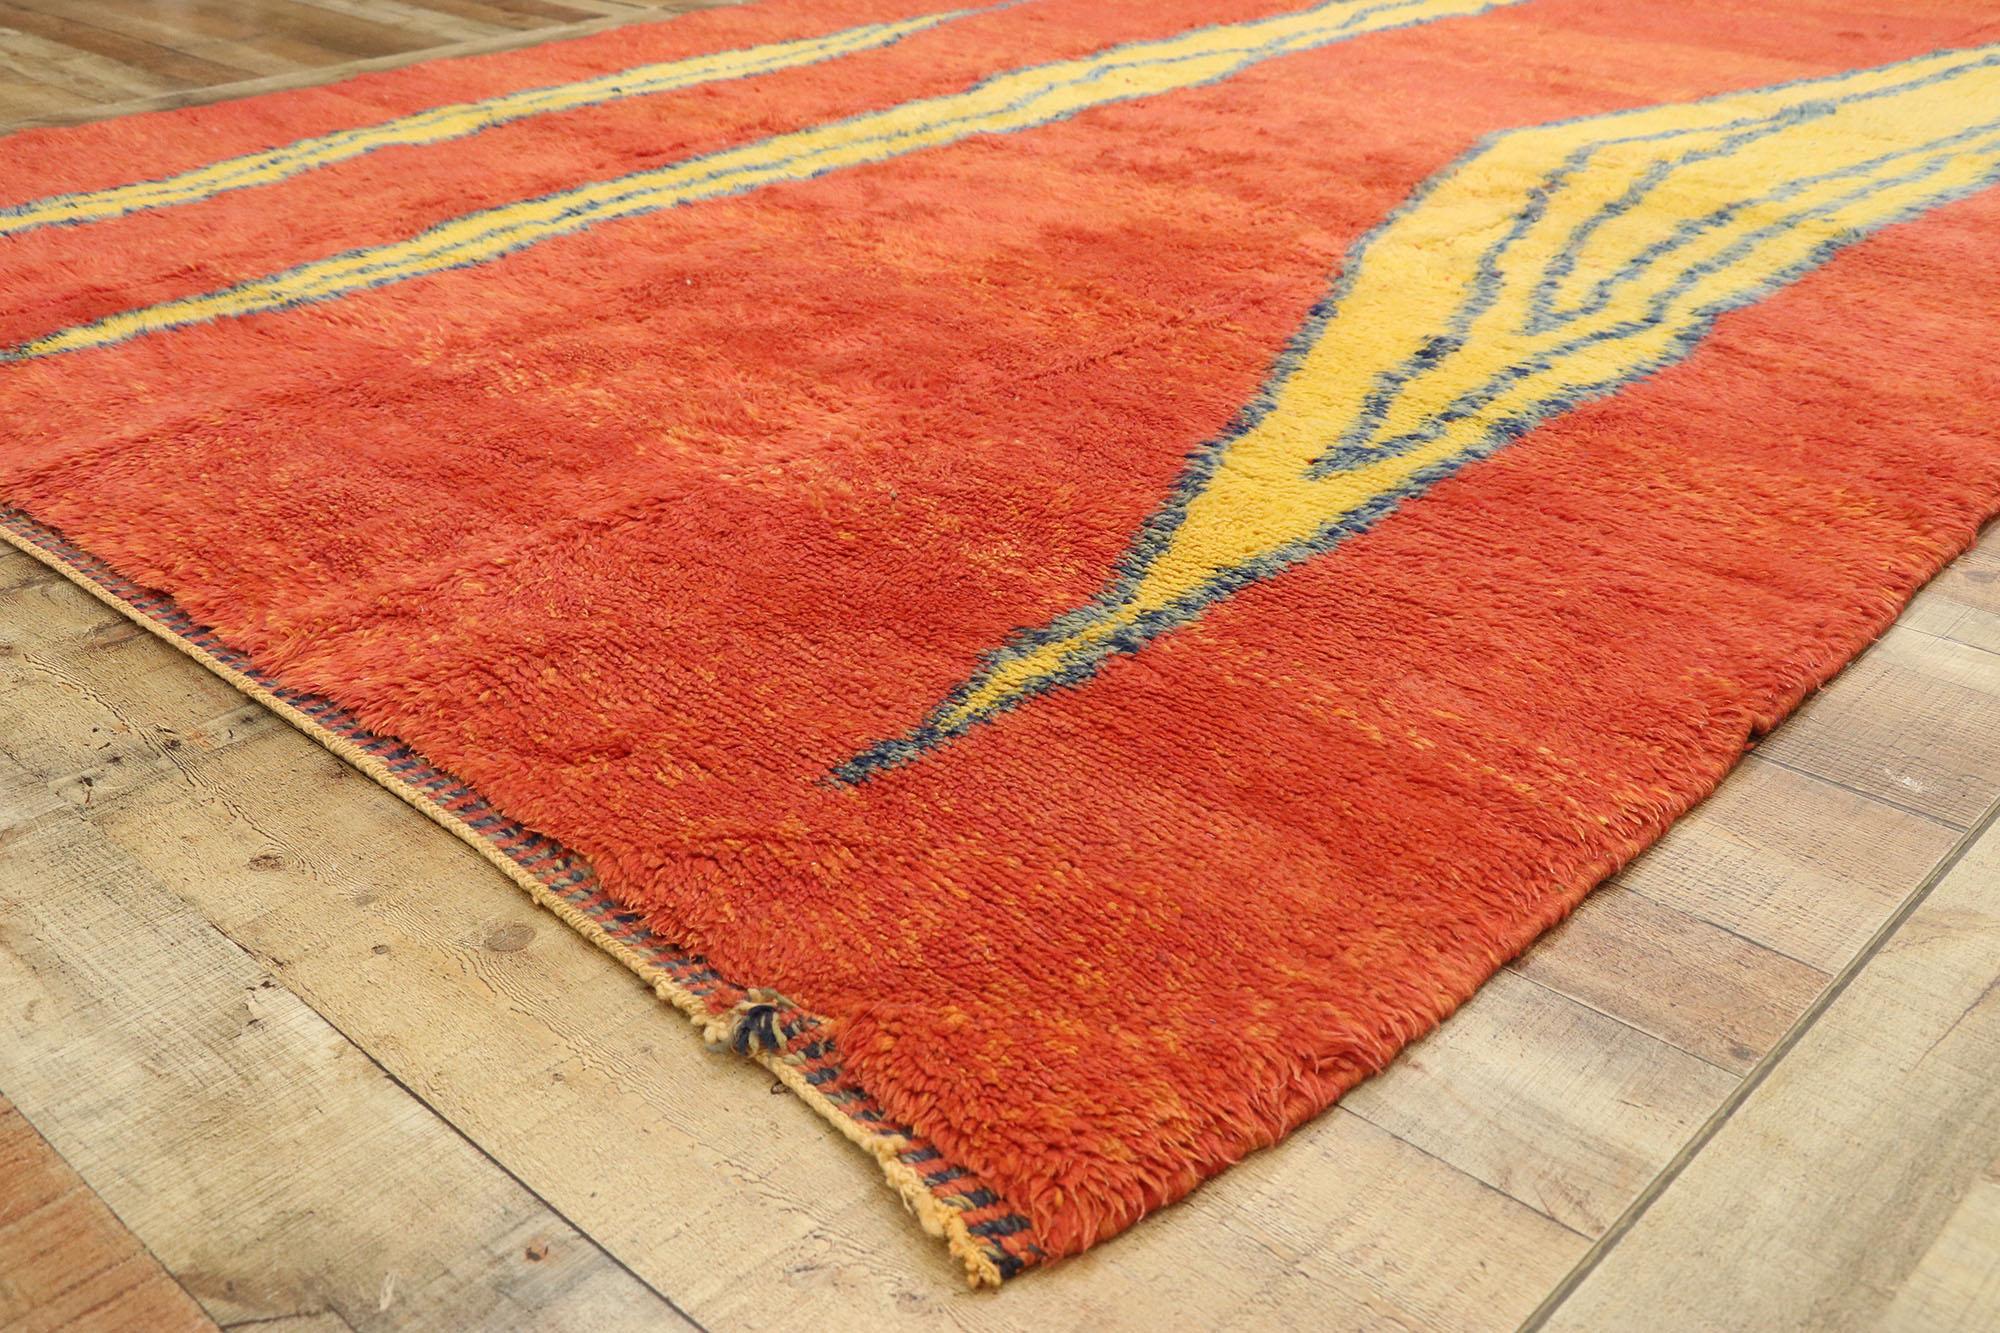 Modern Beni Mrirt Moroccan Rug Inspired by Paul Klee and Clyfford Still In New Condition For Sale In Dallas, TX